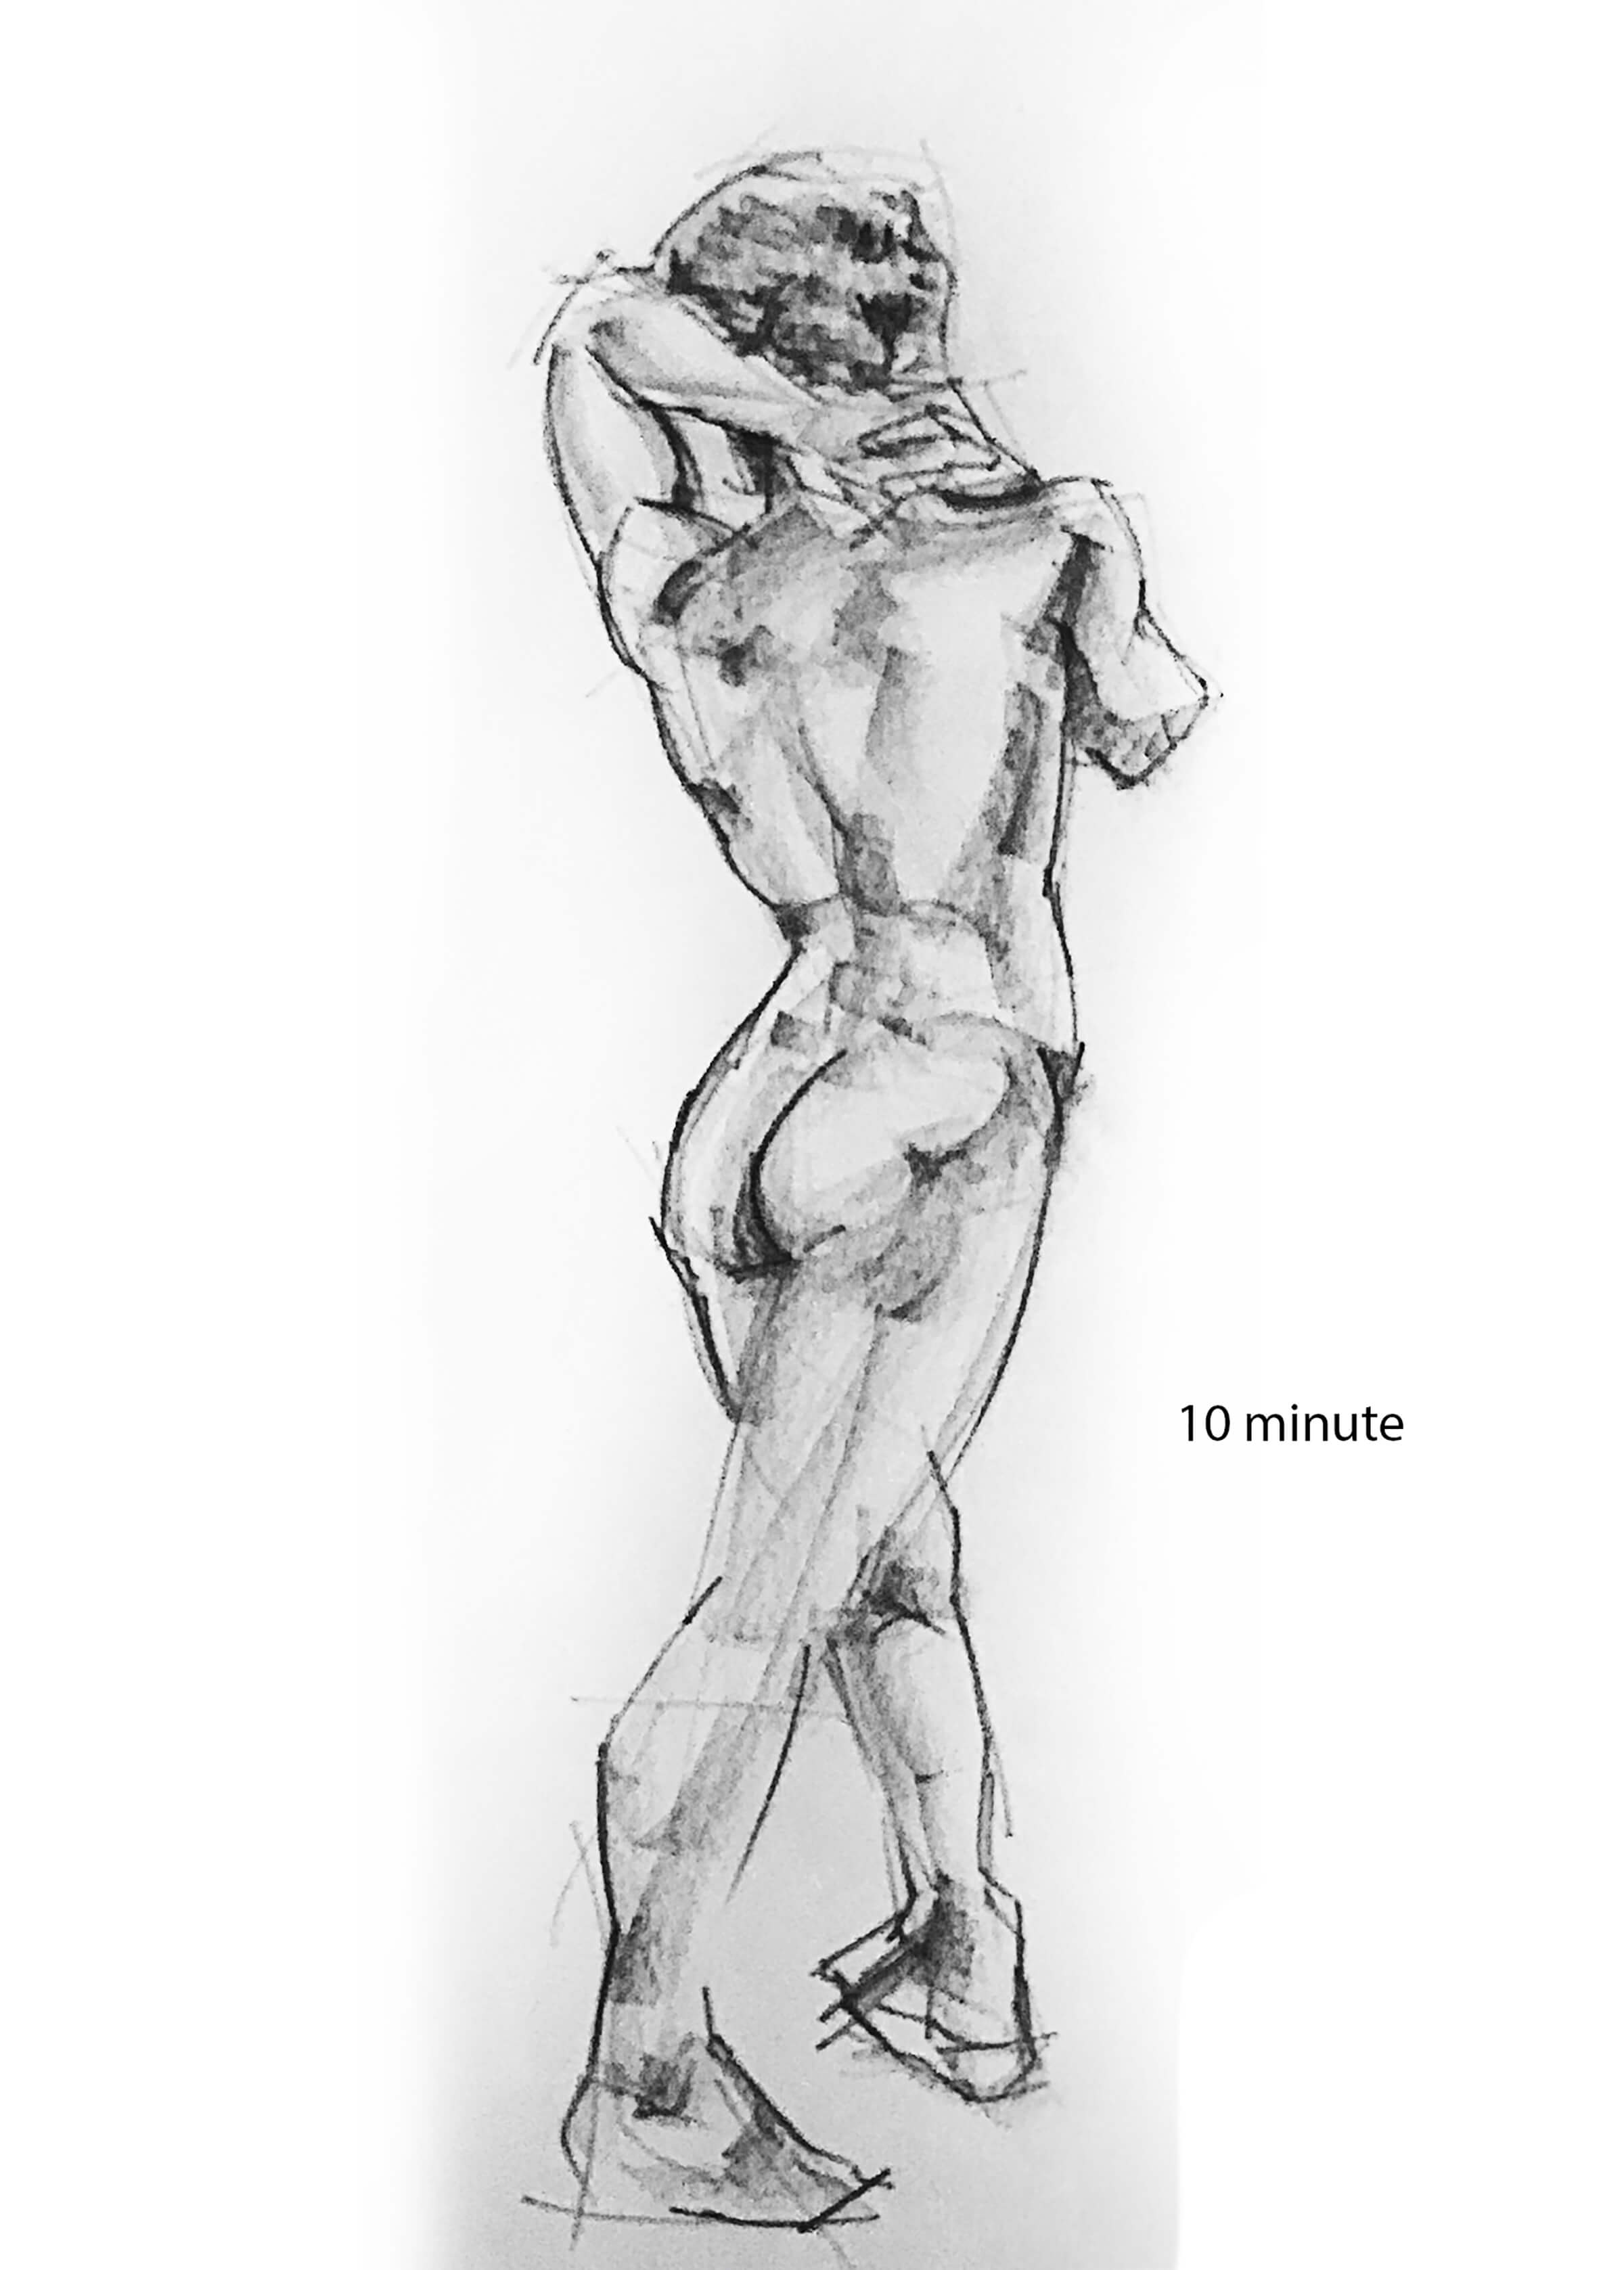 A sketch of a man with his back to the artist, his arm behind his head